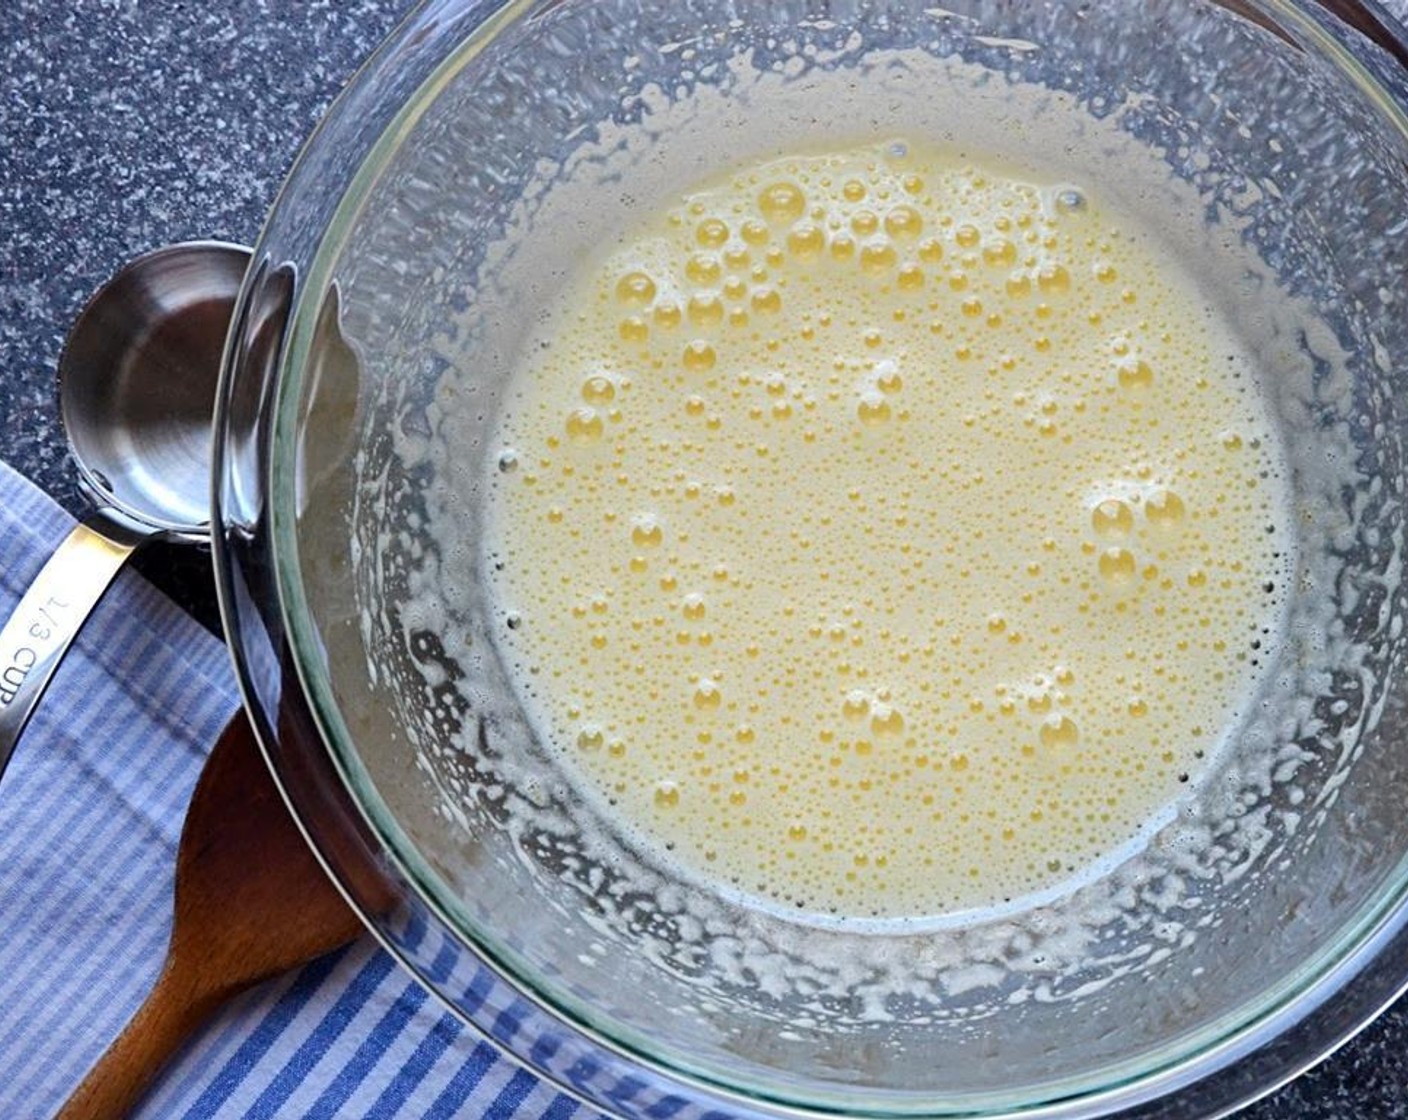 step 2 In a medium mixing bowl, combine the Eggs (2) and Granulated Sugar (1/3 cup) and beat until slightly thickened and pale yellow. Set aside.